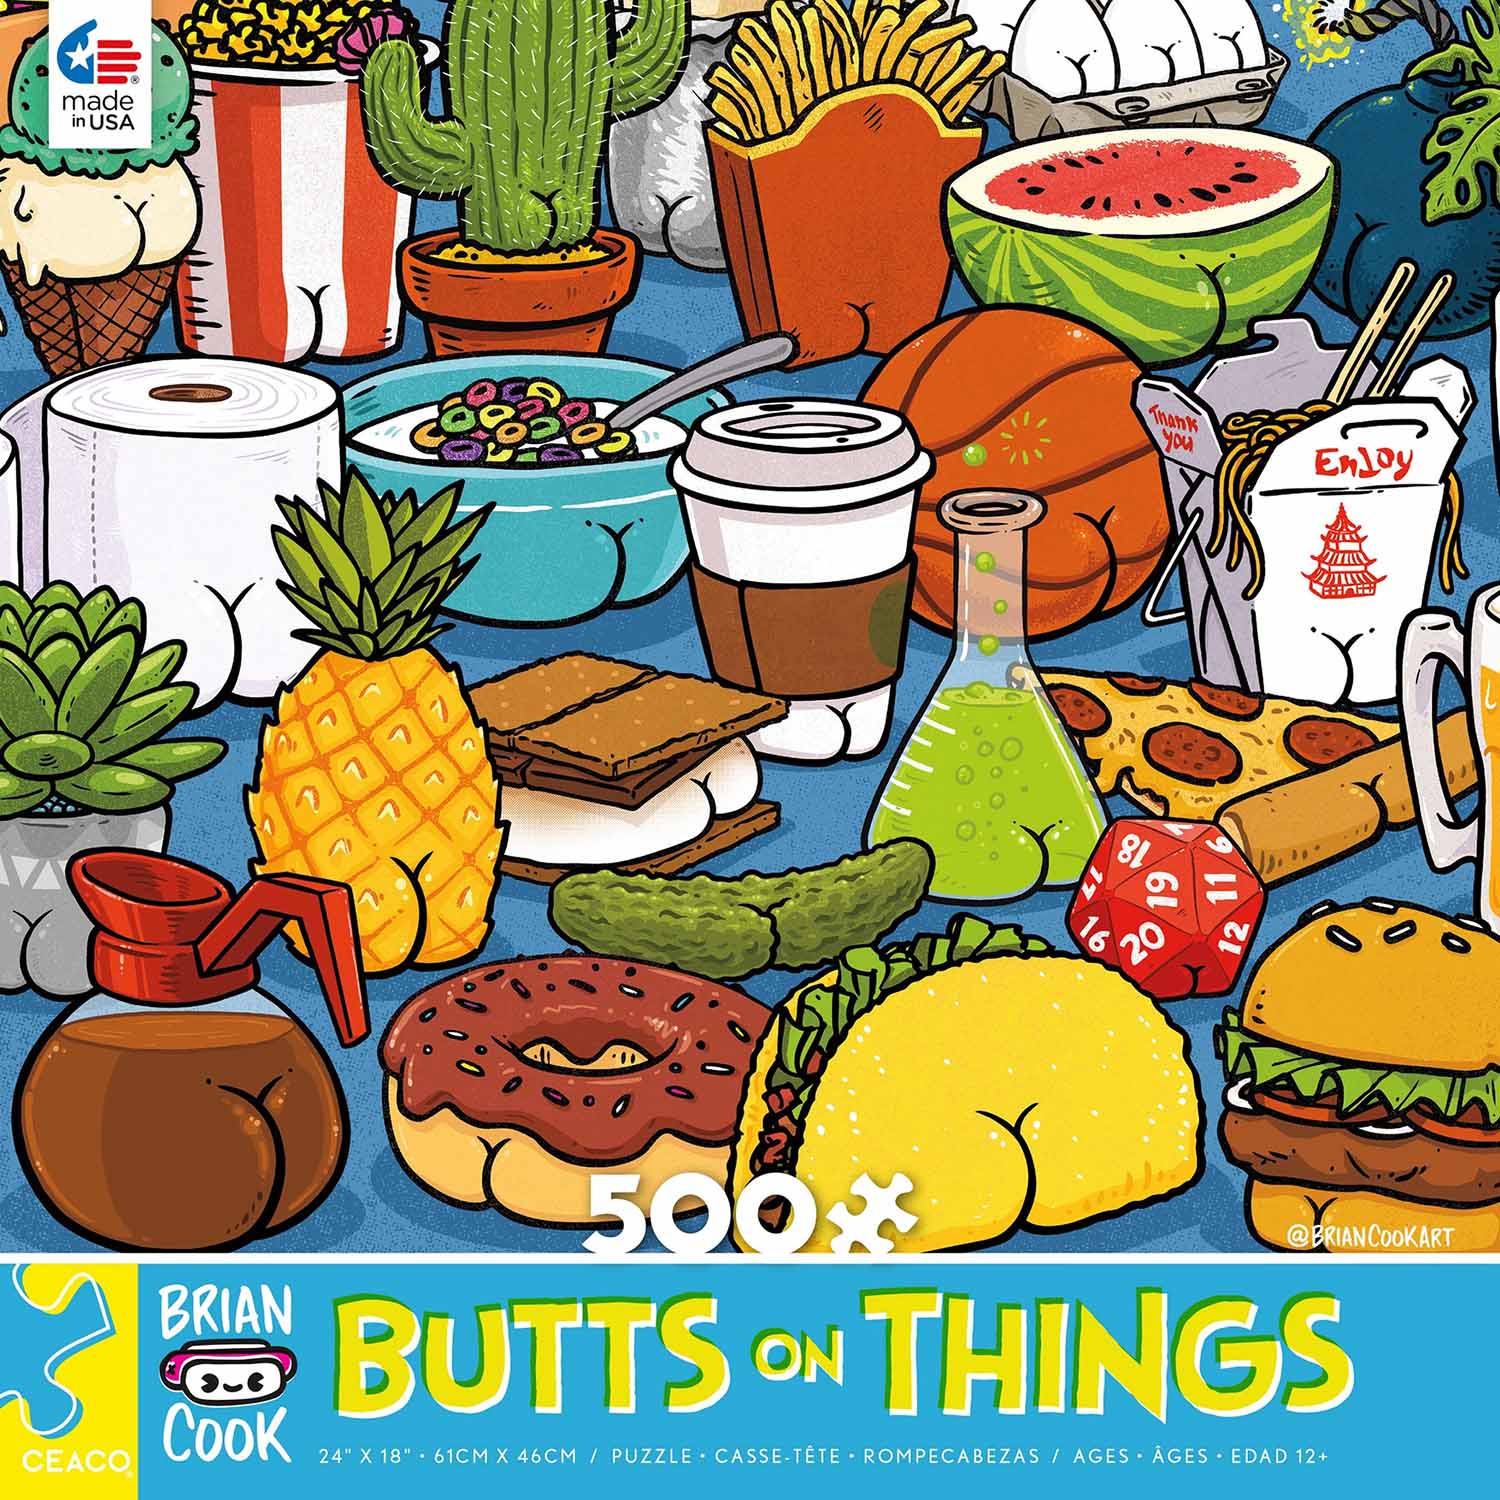 Butts on Things - Butts on Things